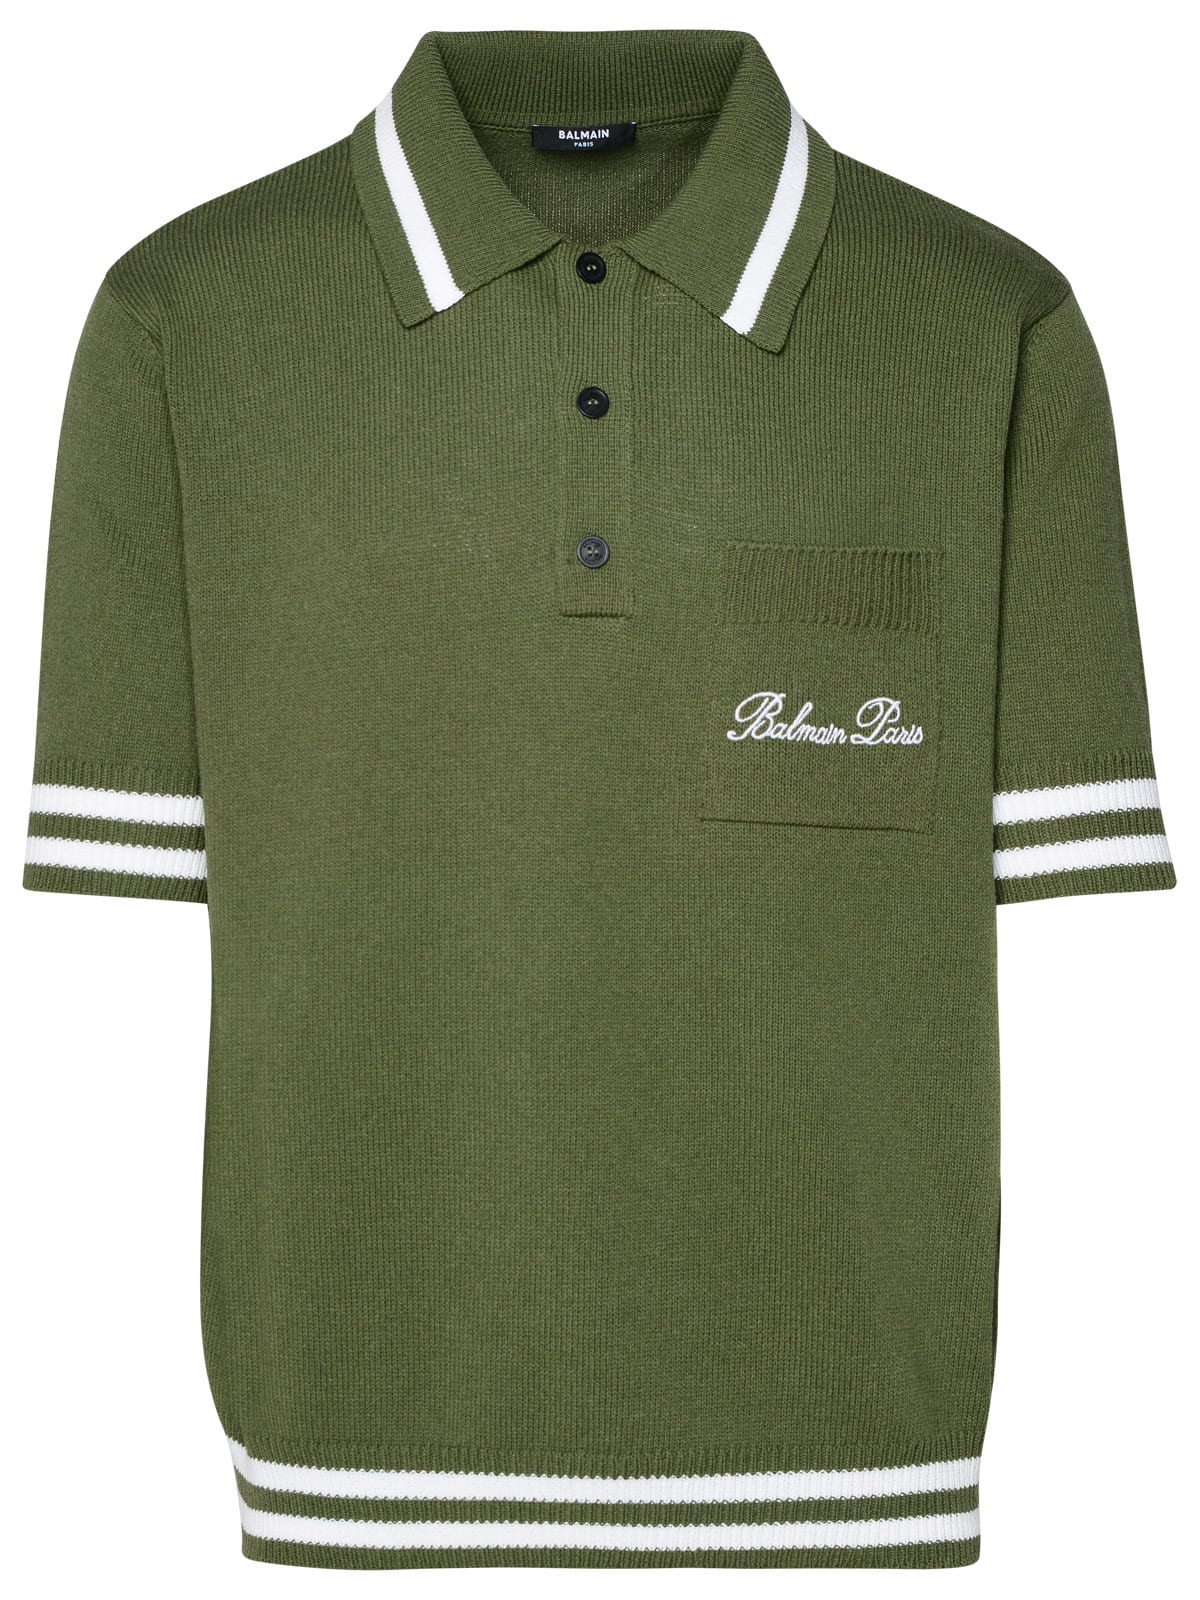 Polo Shirt In Green Cotton Blend